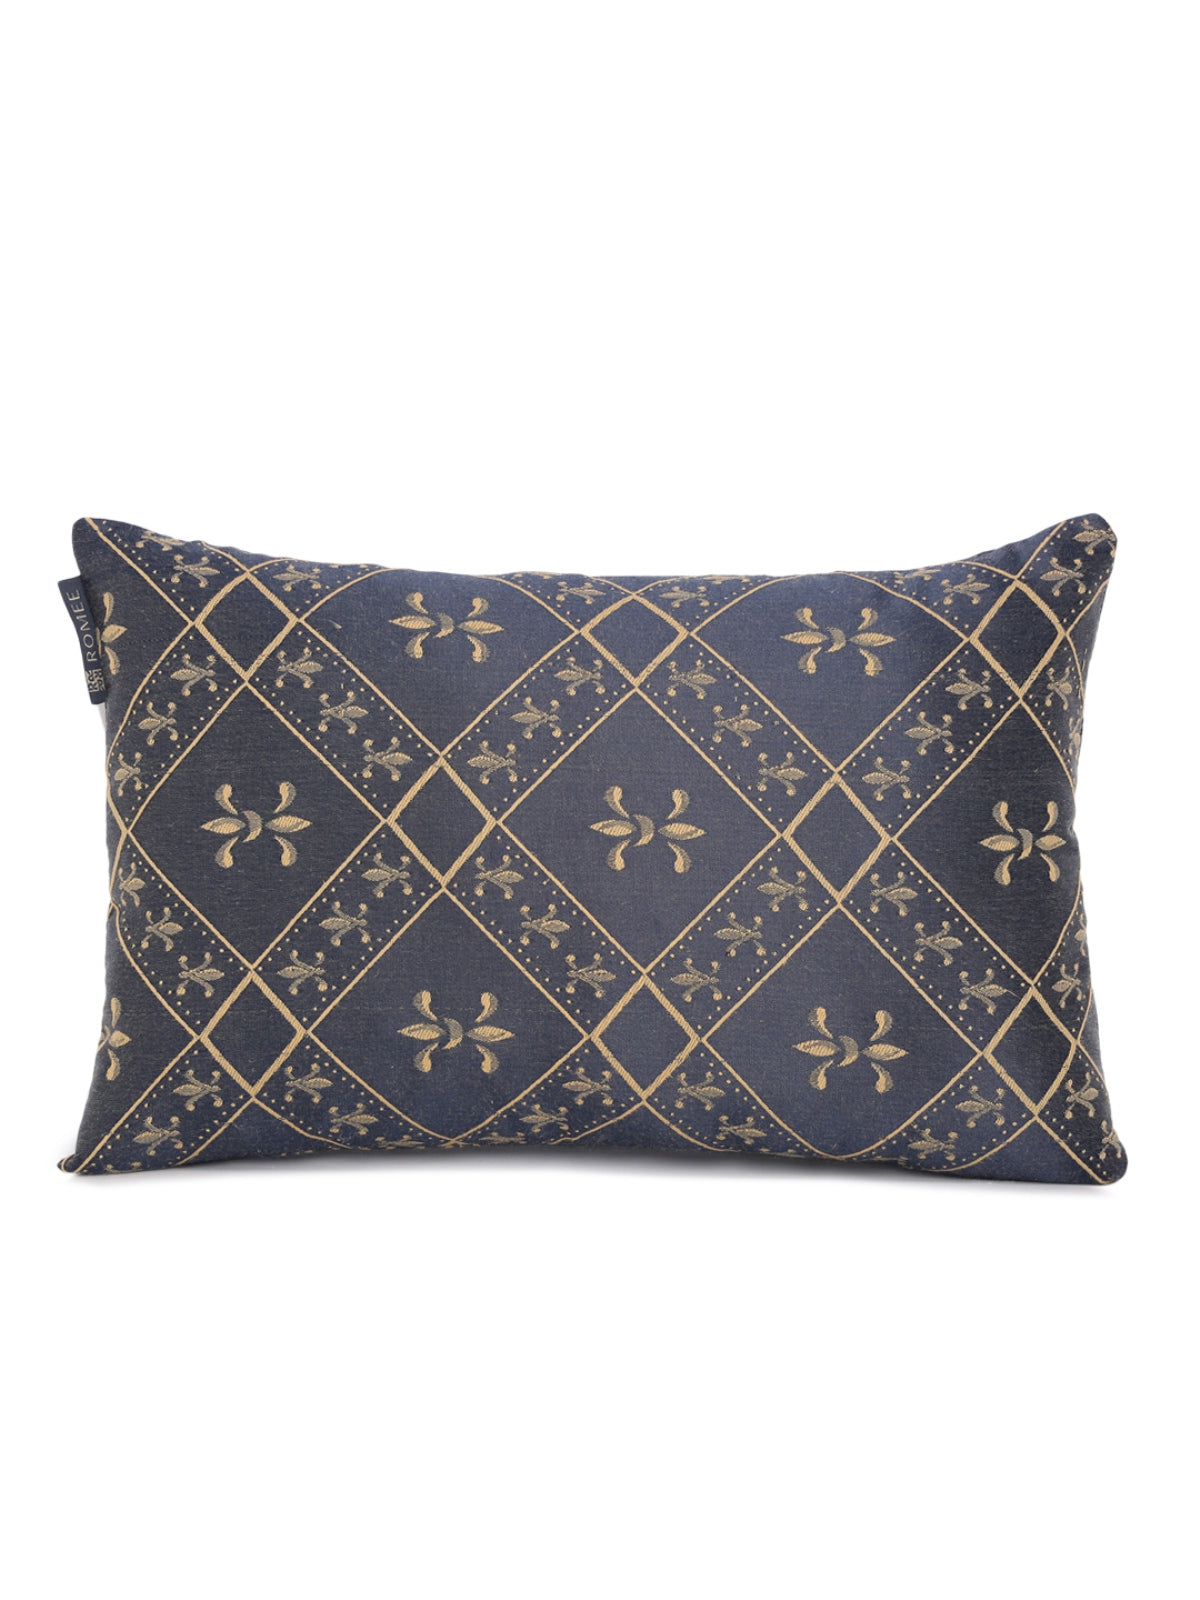 Soft Poly Cotton Ethnic Motifs Cushion Covers 12X18 Set of 2 - Navy Blue